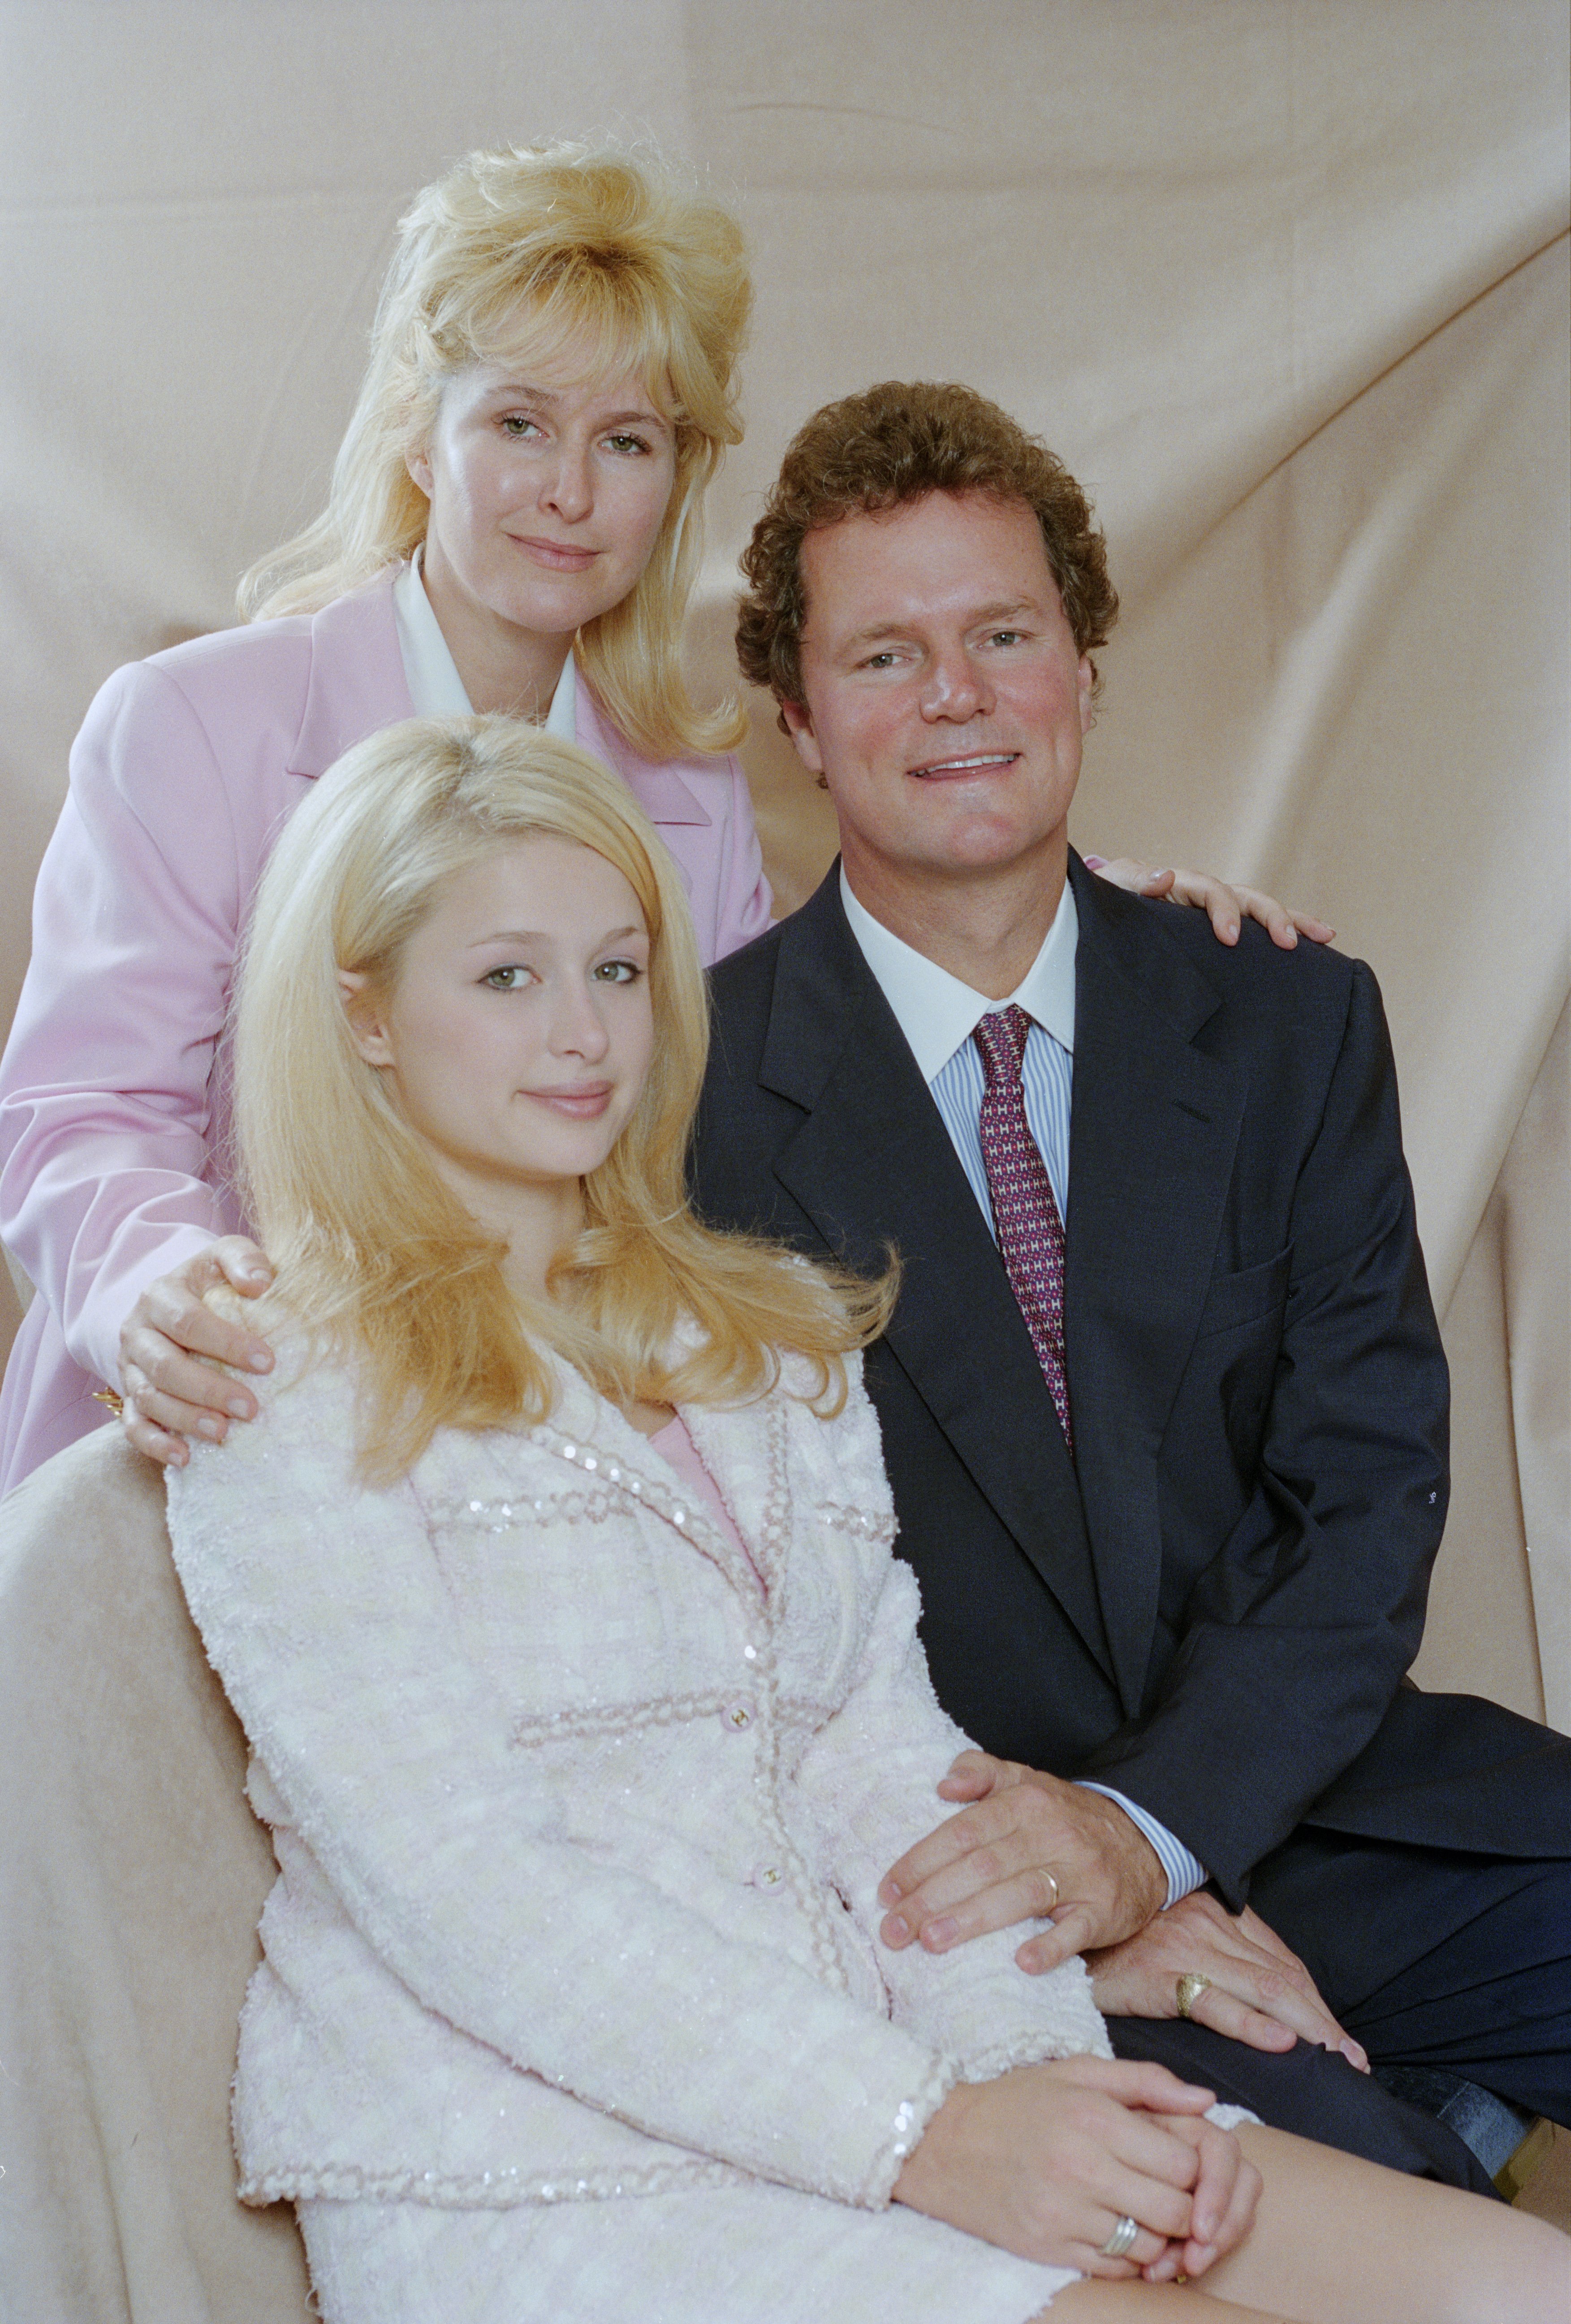 Paris Hilton with her parents, Kathy and Richard Hilton, on July 15, 1996 | Source: Getty Images